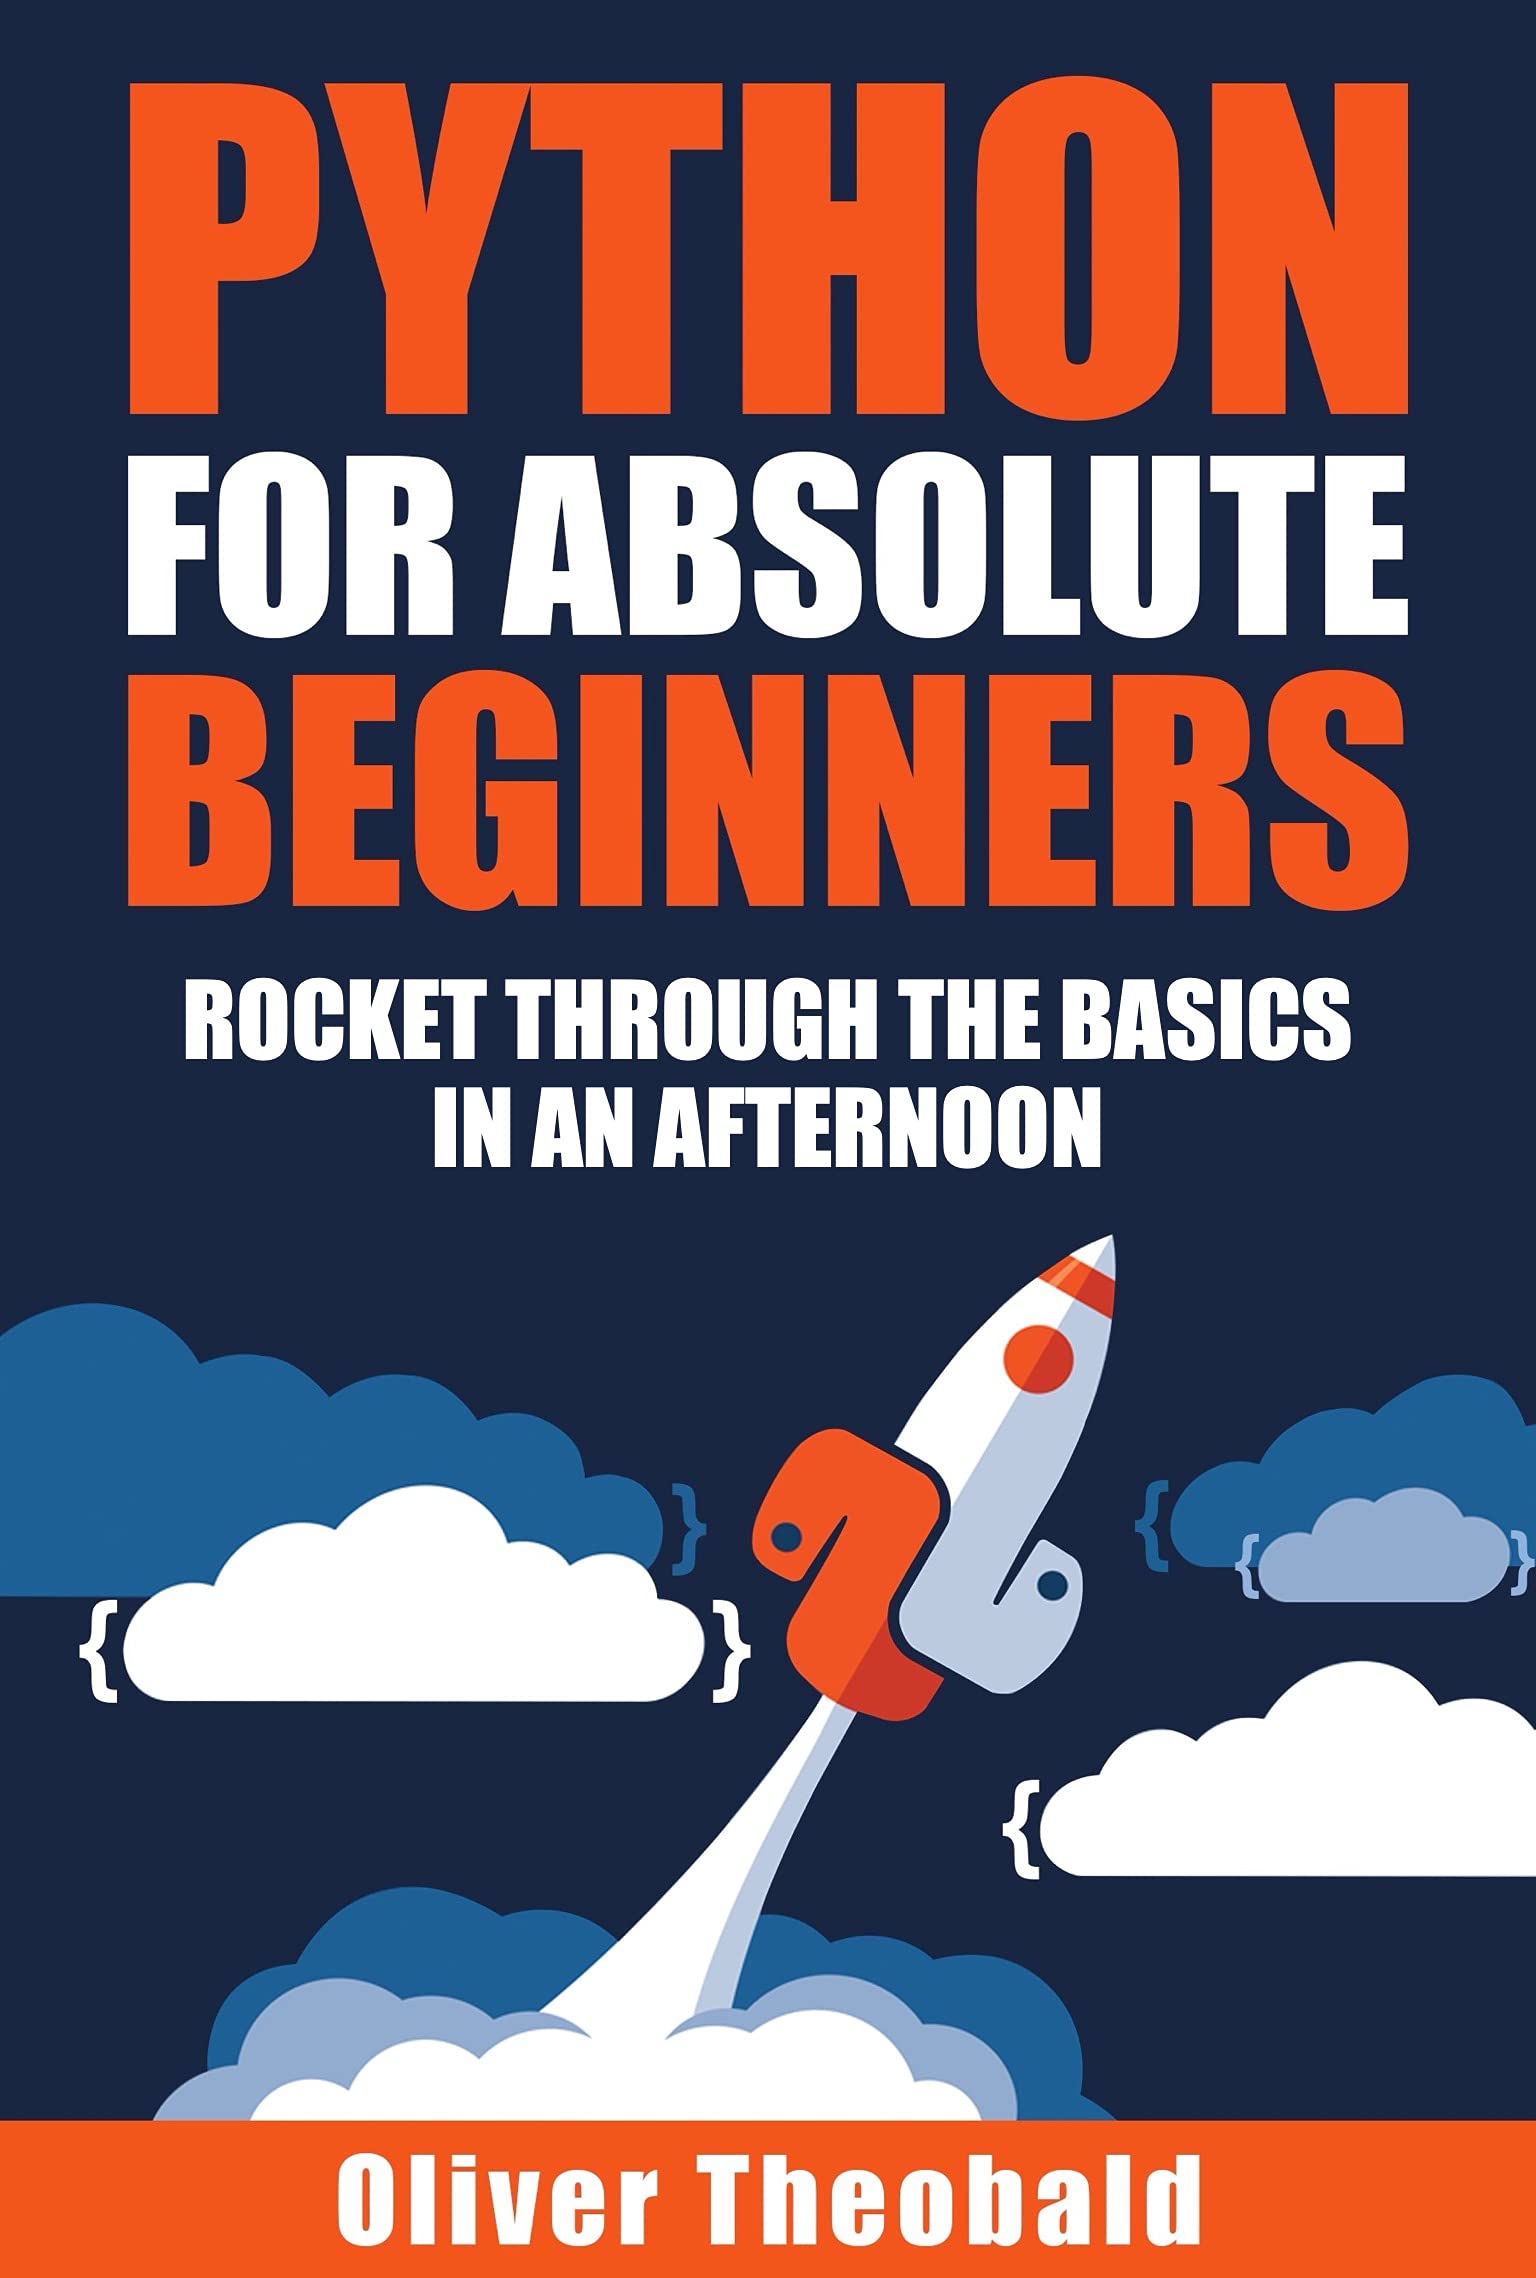 Python for Absolute Beginners: Rocket through the basics in an afternoon (AI, Data Science, Python & Statistics for Beginners Book 4)